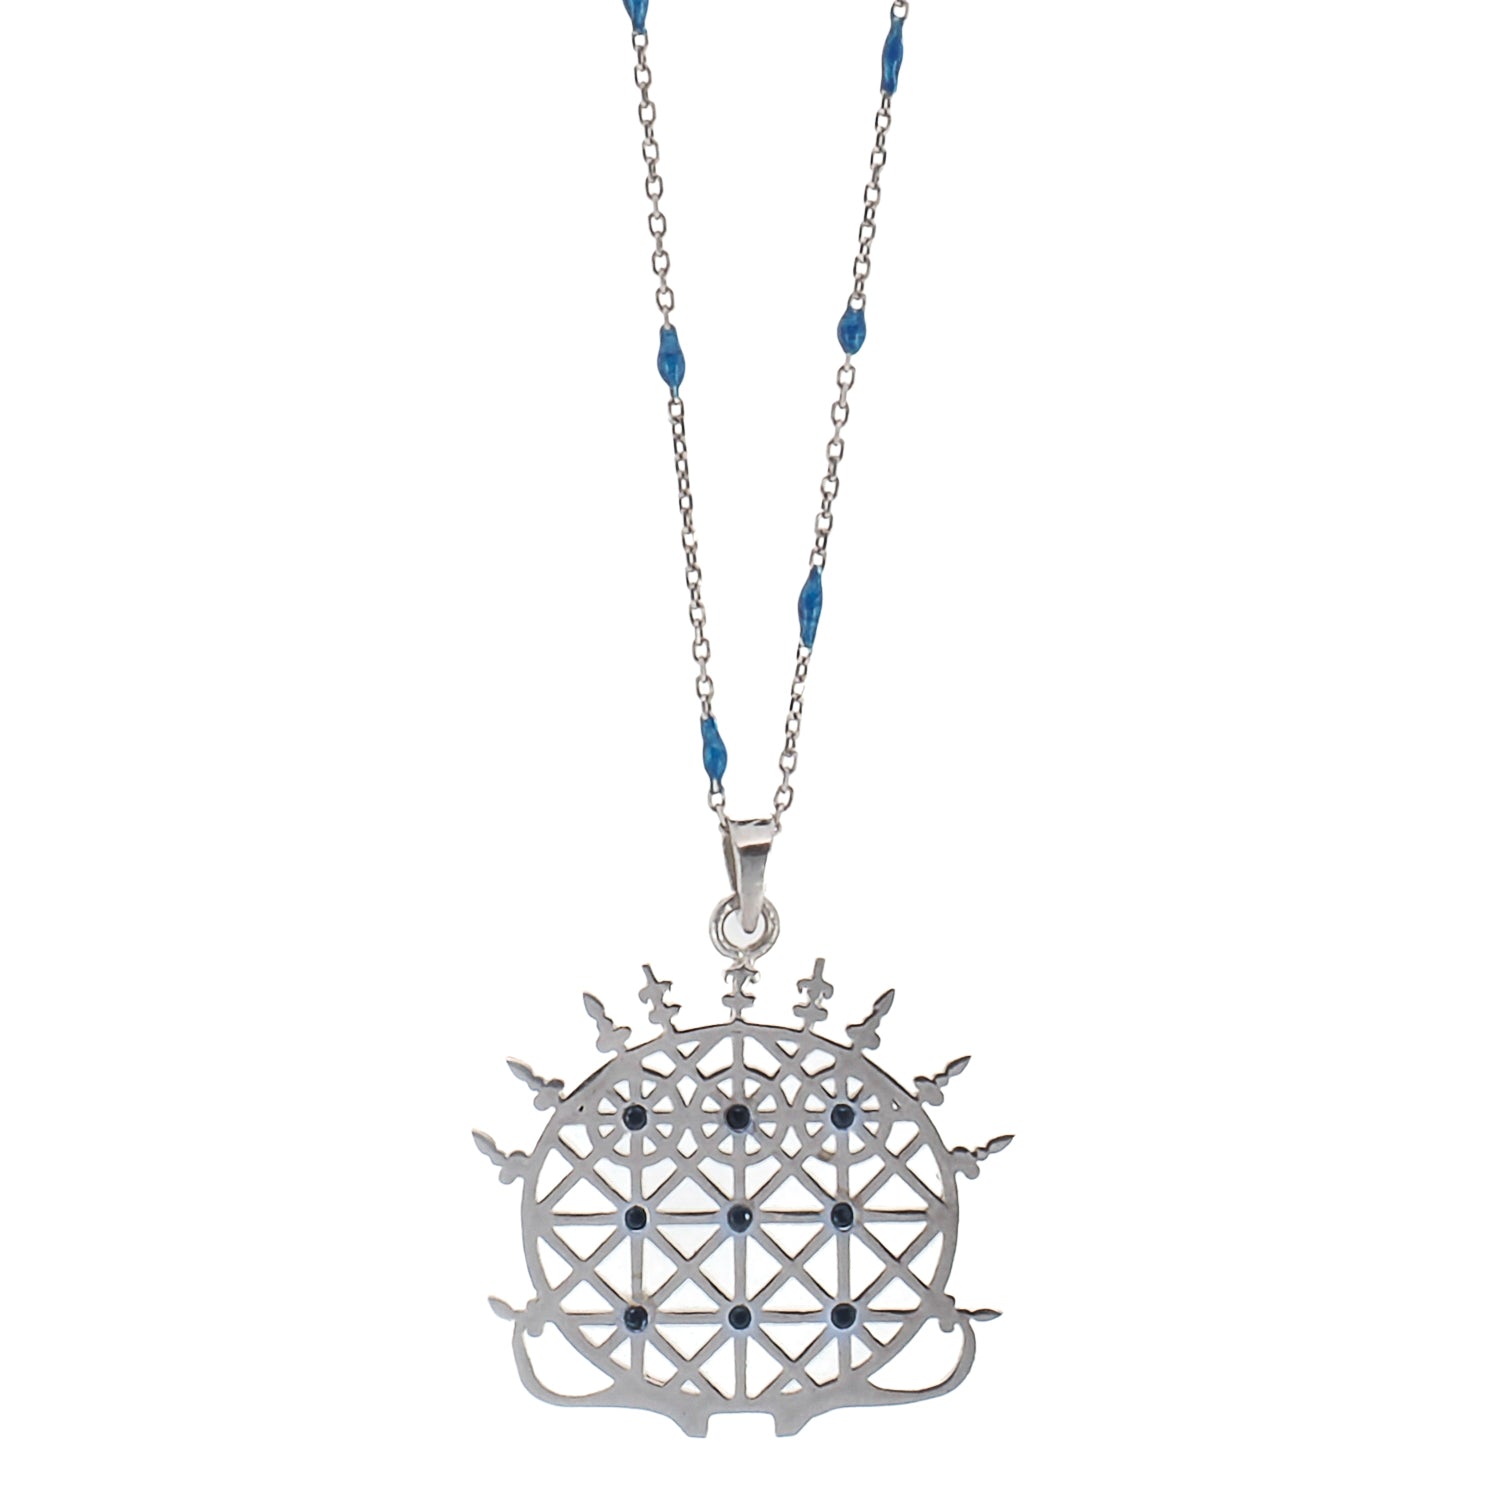 The Hittite Sun Disk Necklace, featuring a sterling silver pendant adorned with lapis lazuli stones.